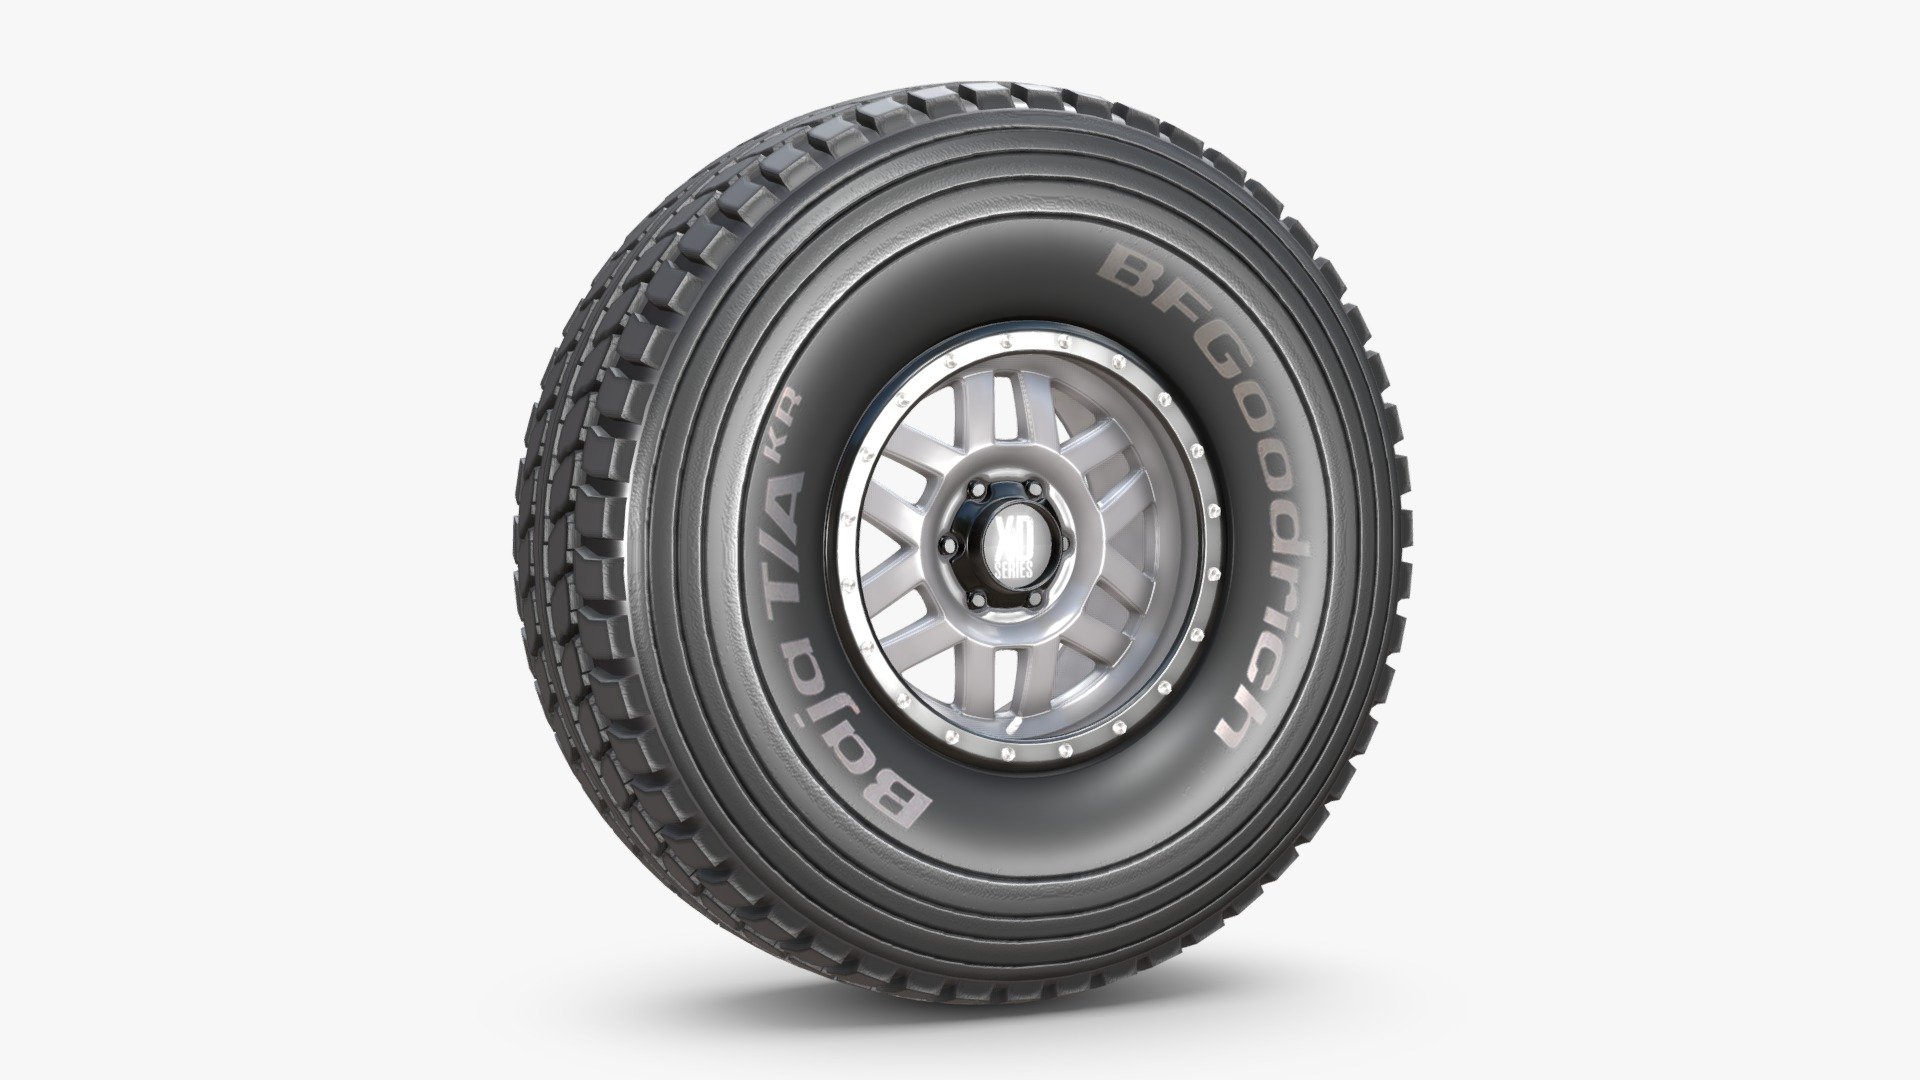 NNAVAS 3D store.

3D model of a BFGoodrich Baja T/A KR tire on a KMC XD 128 wheel.

The model was created with 3DS Max 2016 using the open subdivision modifier which has been left in the stack.

SPECIFICATIONS:

The model has 12.914 polygons with subdivision level at 0 and 35.036 at level 1.

Renderer: V Ray 3.2.

Scale/transform is set to 100%, units are set to centimeters, texture paths are stripped and and it is made to real world scale.

FBX, OBJ and 3DS files have been included in separated HI and LO subdivision versions.

MATERIALS AND TEXTURES:

All materials and textures are included and mapped in all files, settings might have to be adjusted depending on the software you are using. JPG textures have 1024 x 1024 resolution 3d model